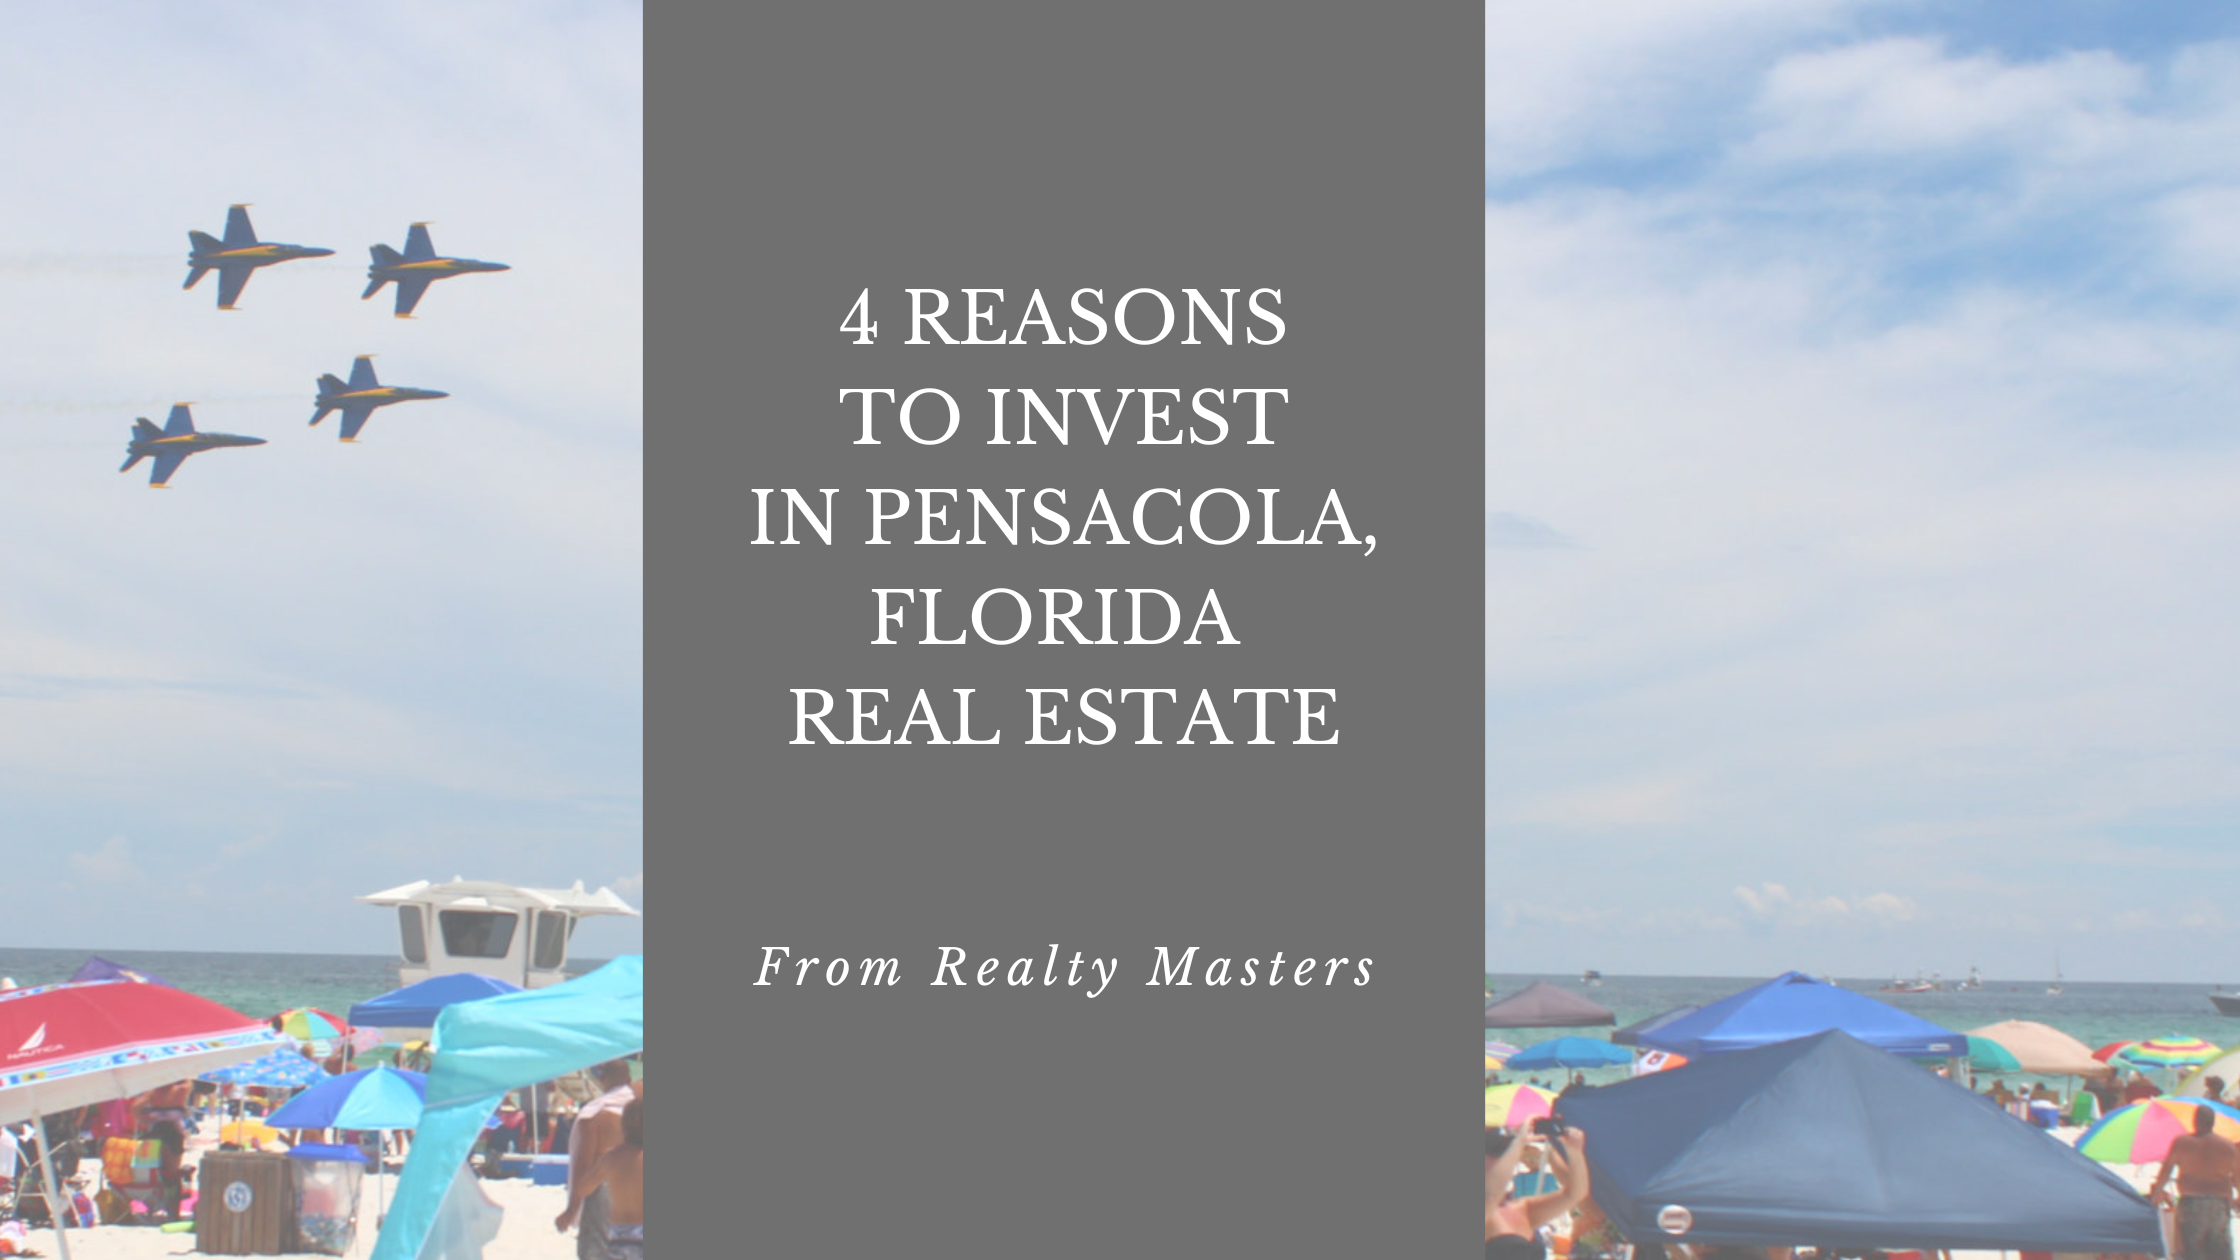 4 Reasons to Invest in Pensacola, FL Real Estate photo